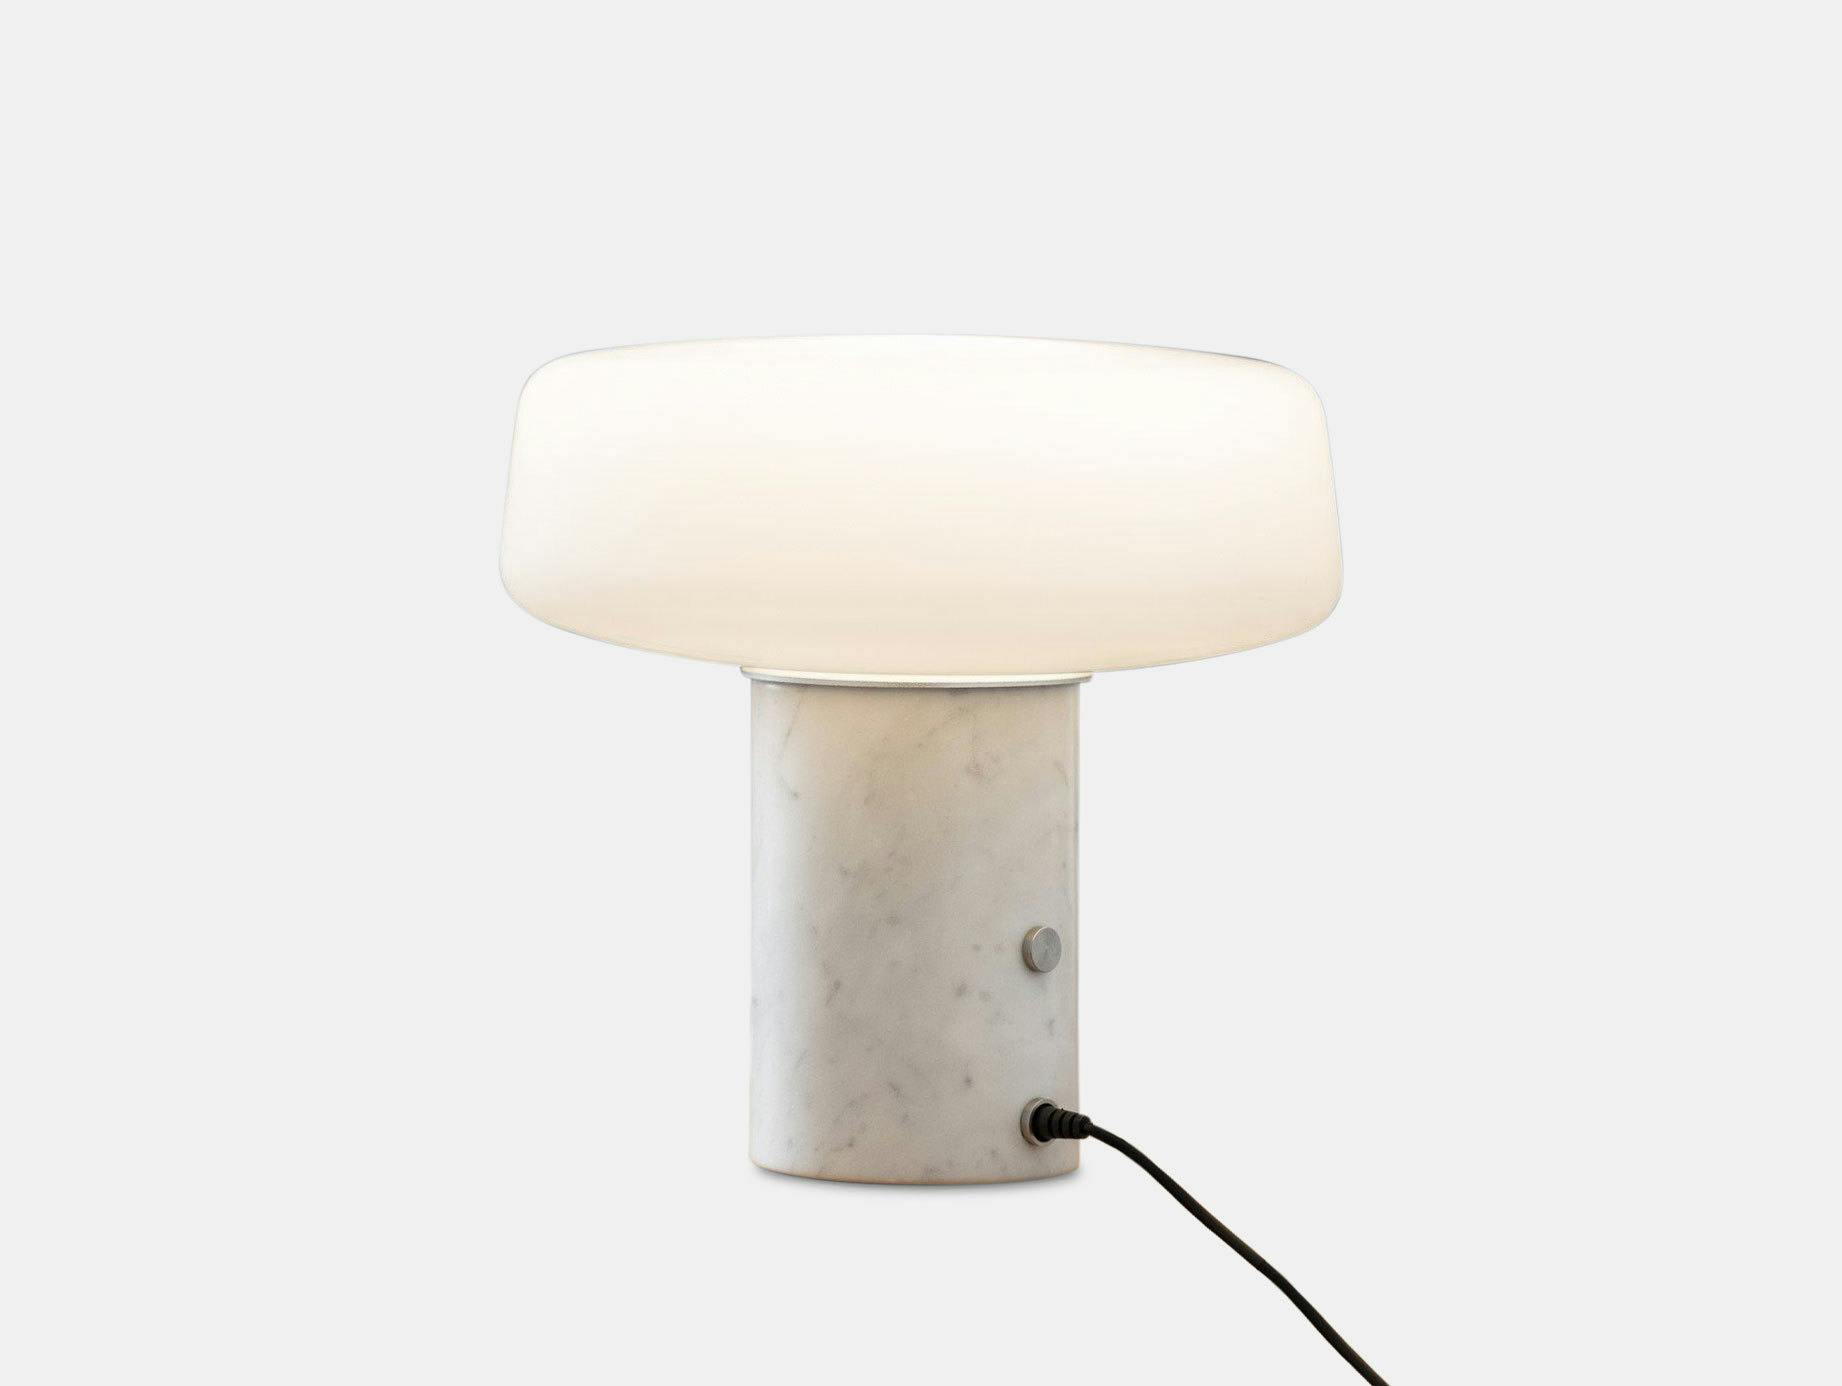 Terence Woodgate Solid Table Light small White Carrara Marble